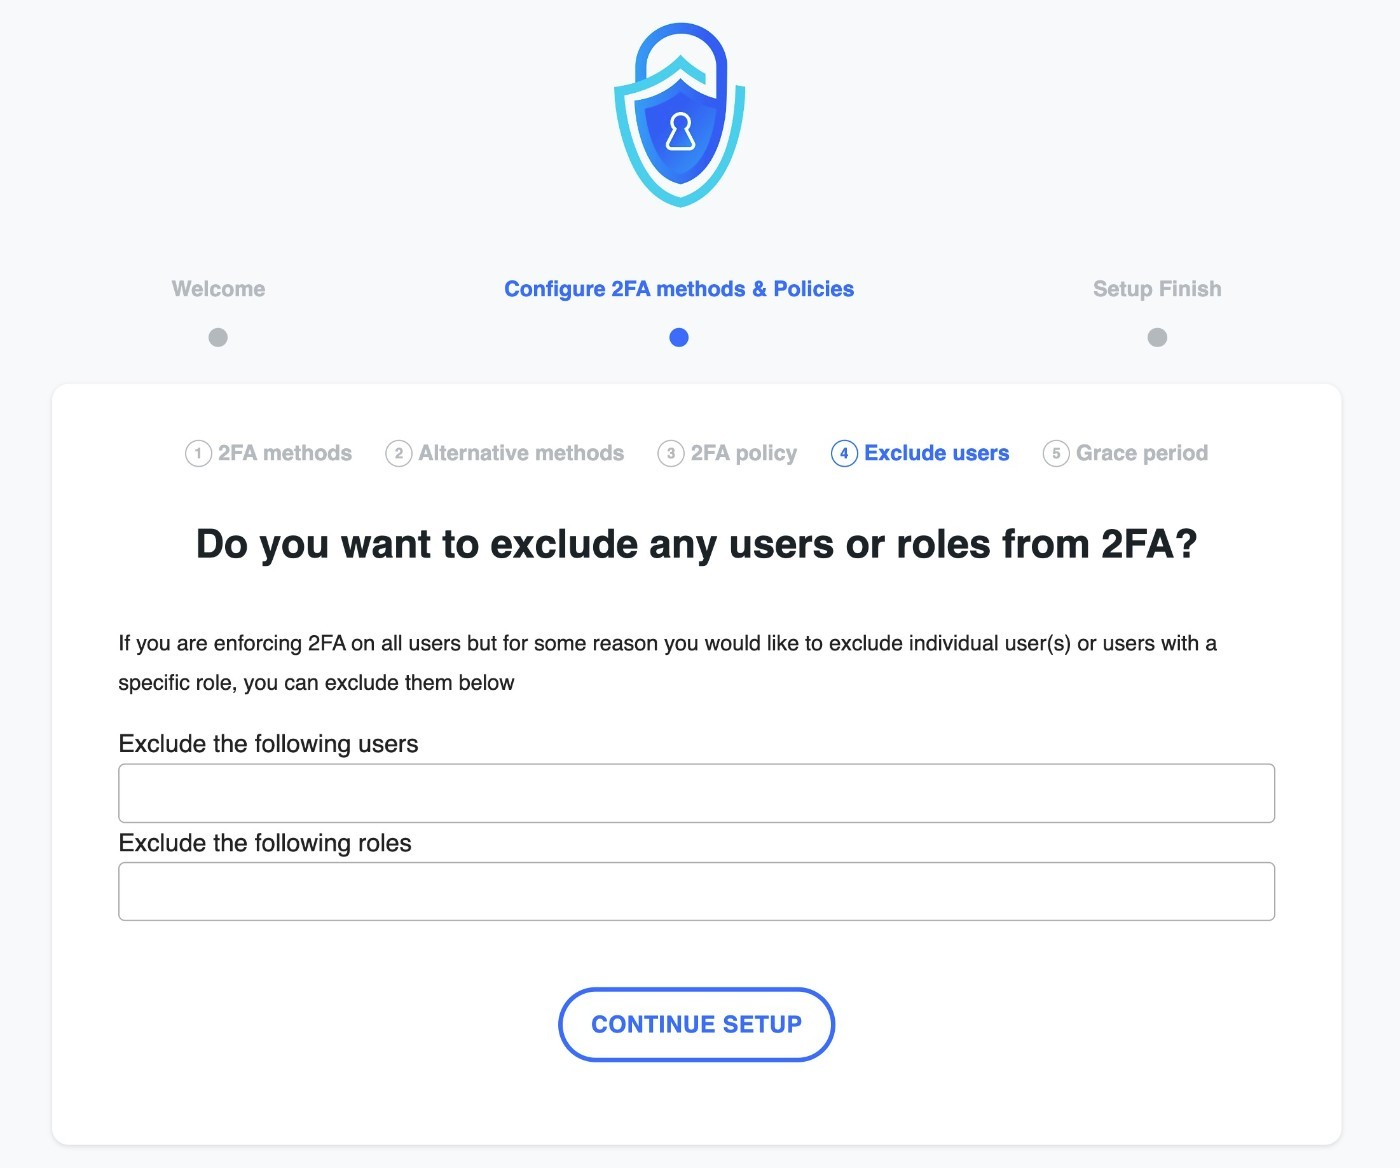 Exclude users from 2FA